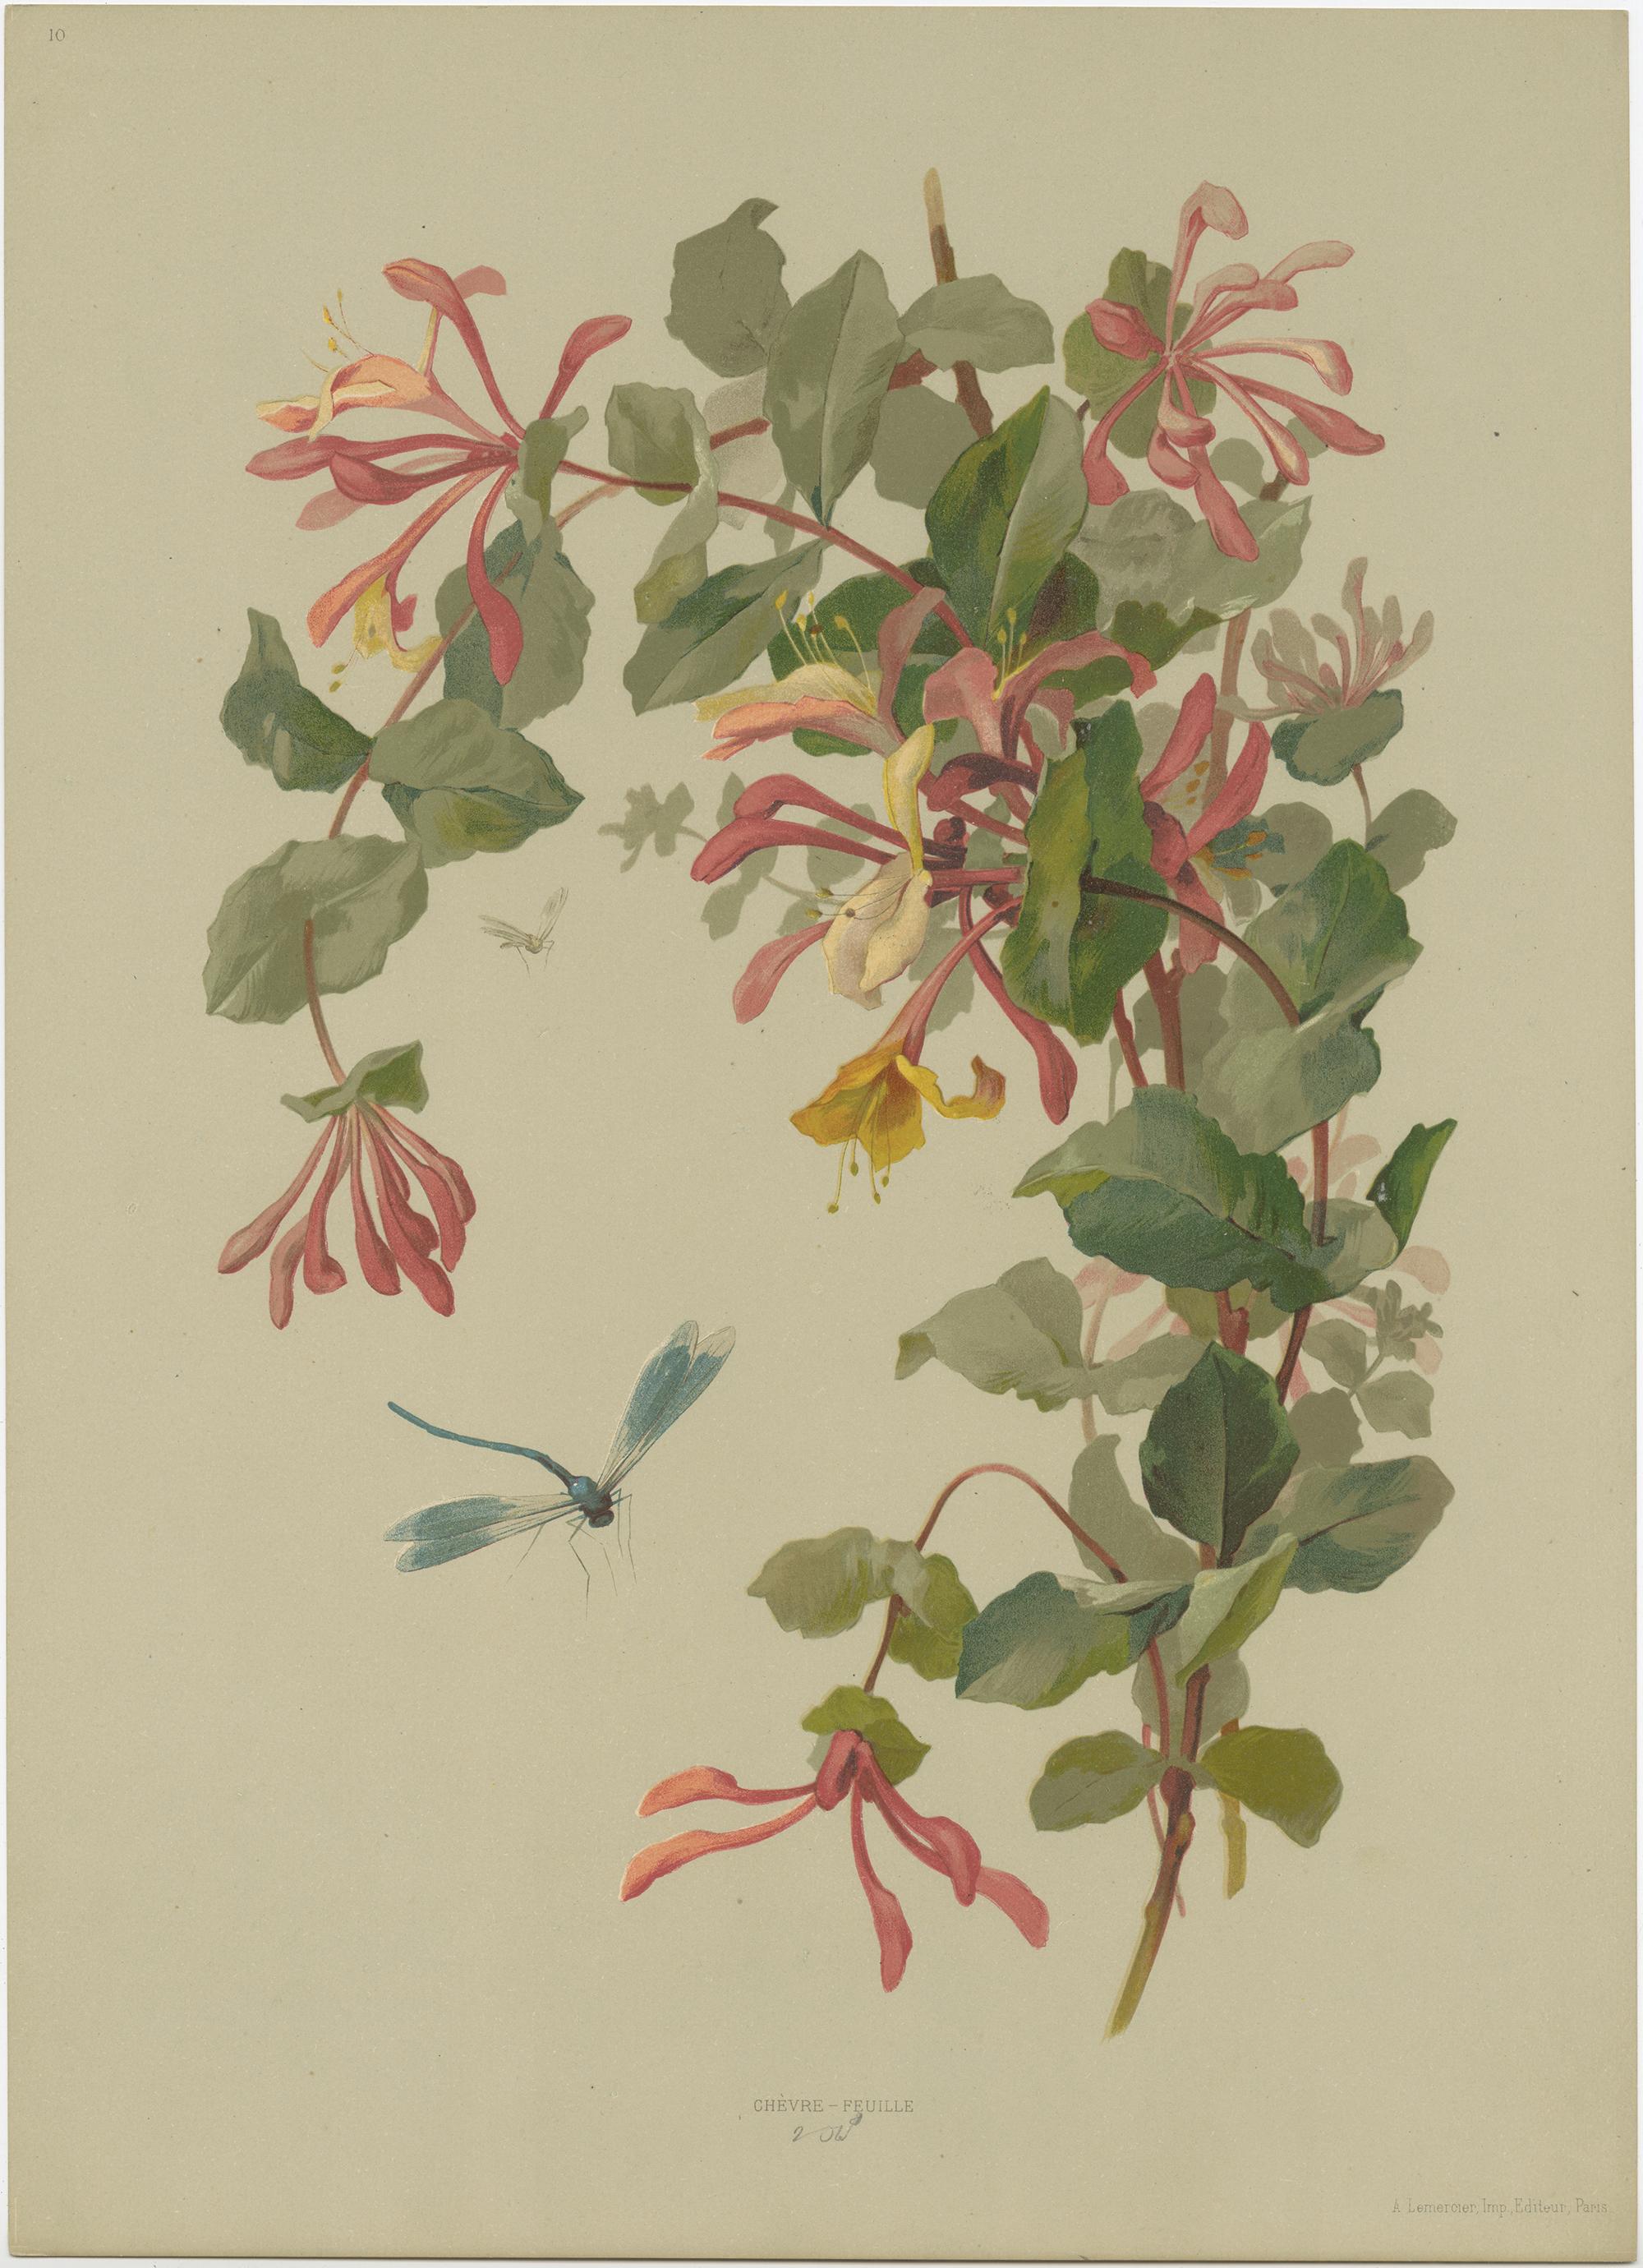 Set of four original lithographs of various plants, flowers and insects. Published by A. Lemercier in Paris, circa 1890.